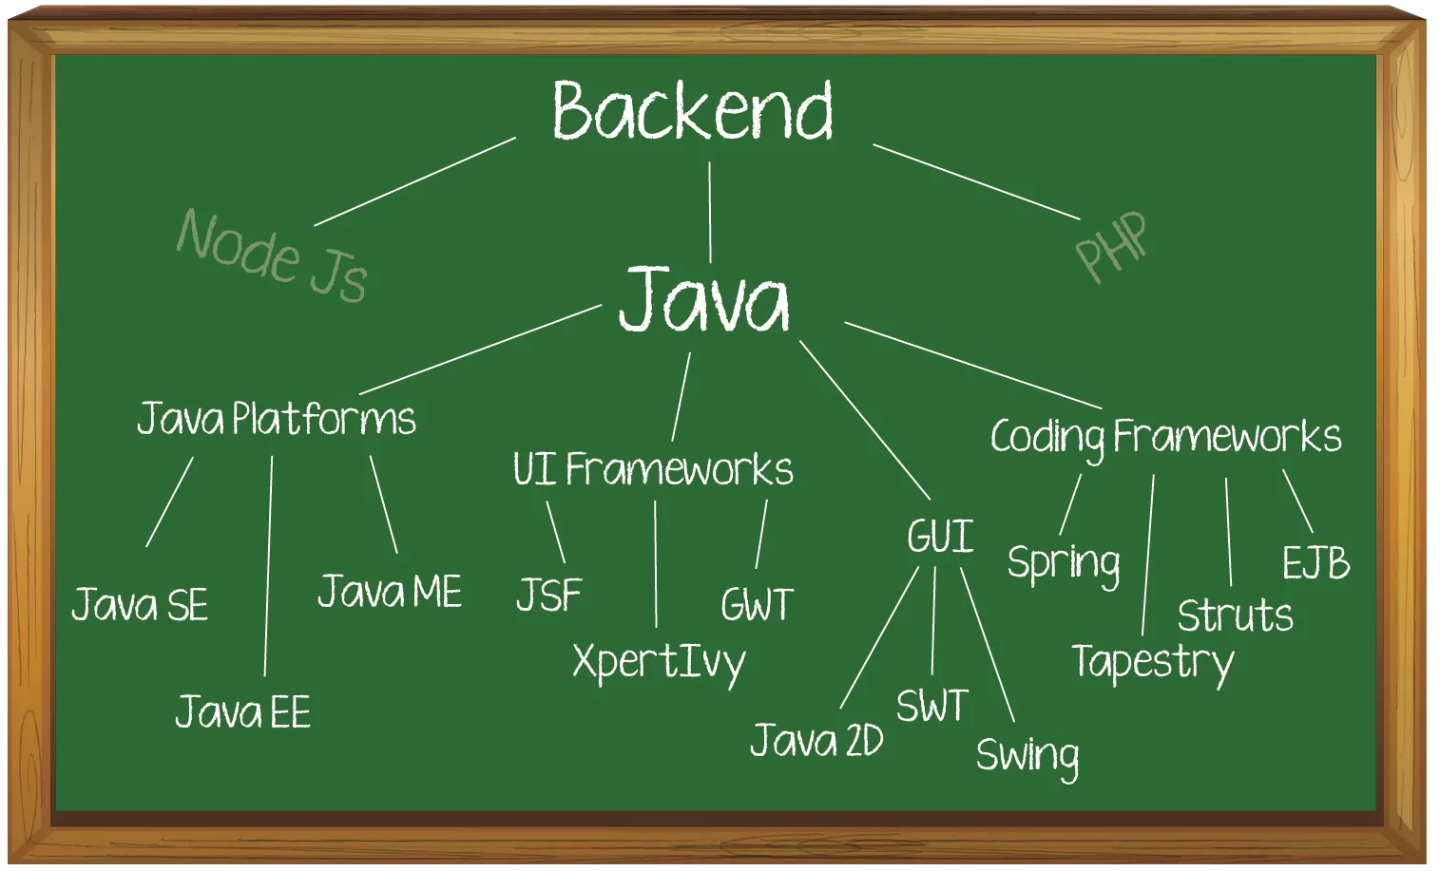 [Course] Java Backend Full Course